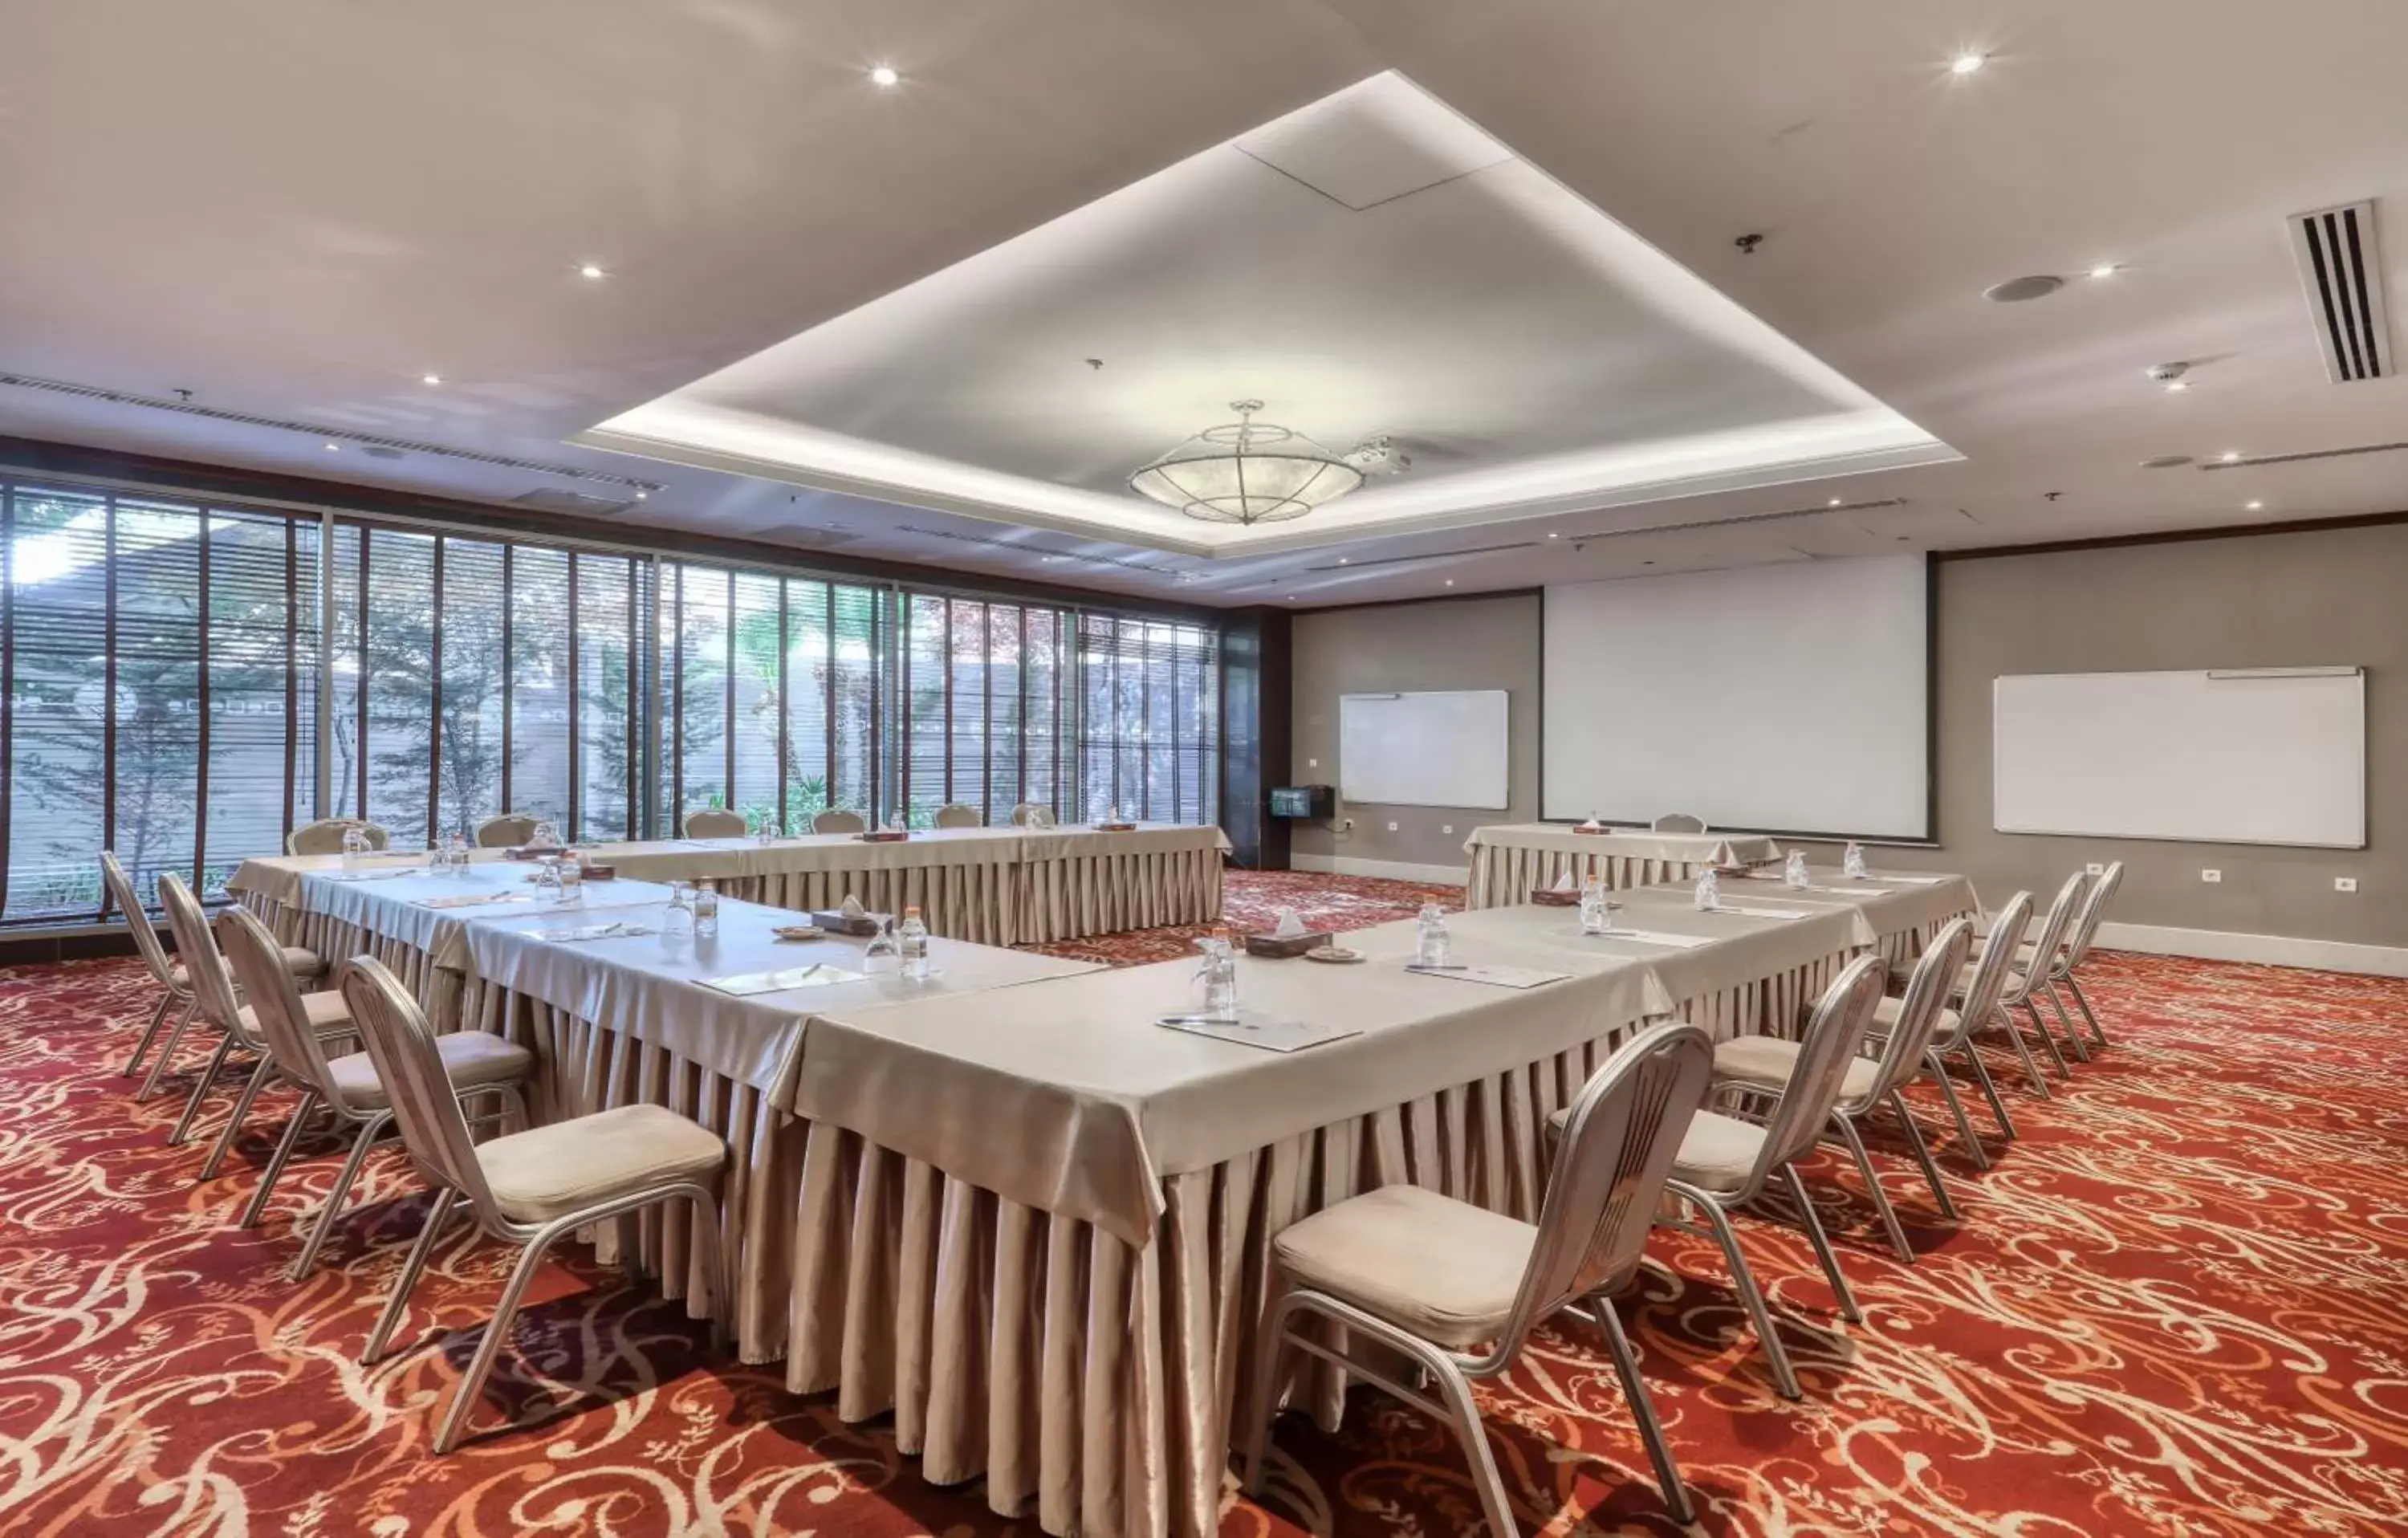 Meeting/conference room in Geneva Hotel